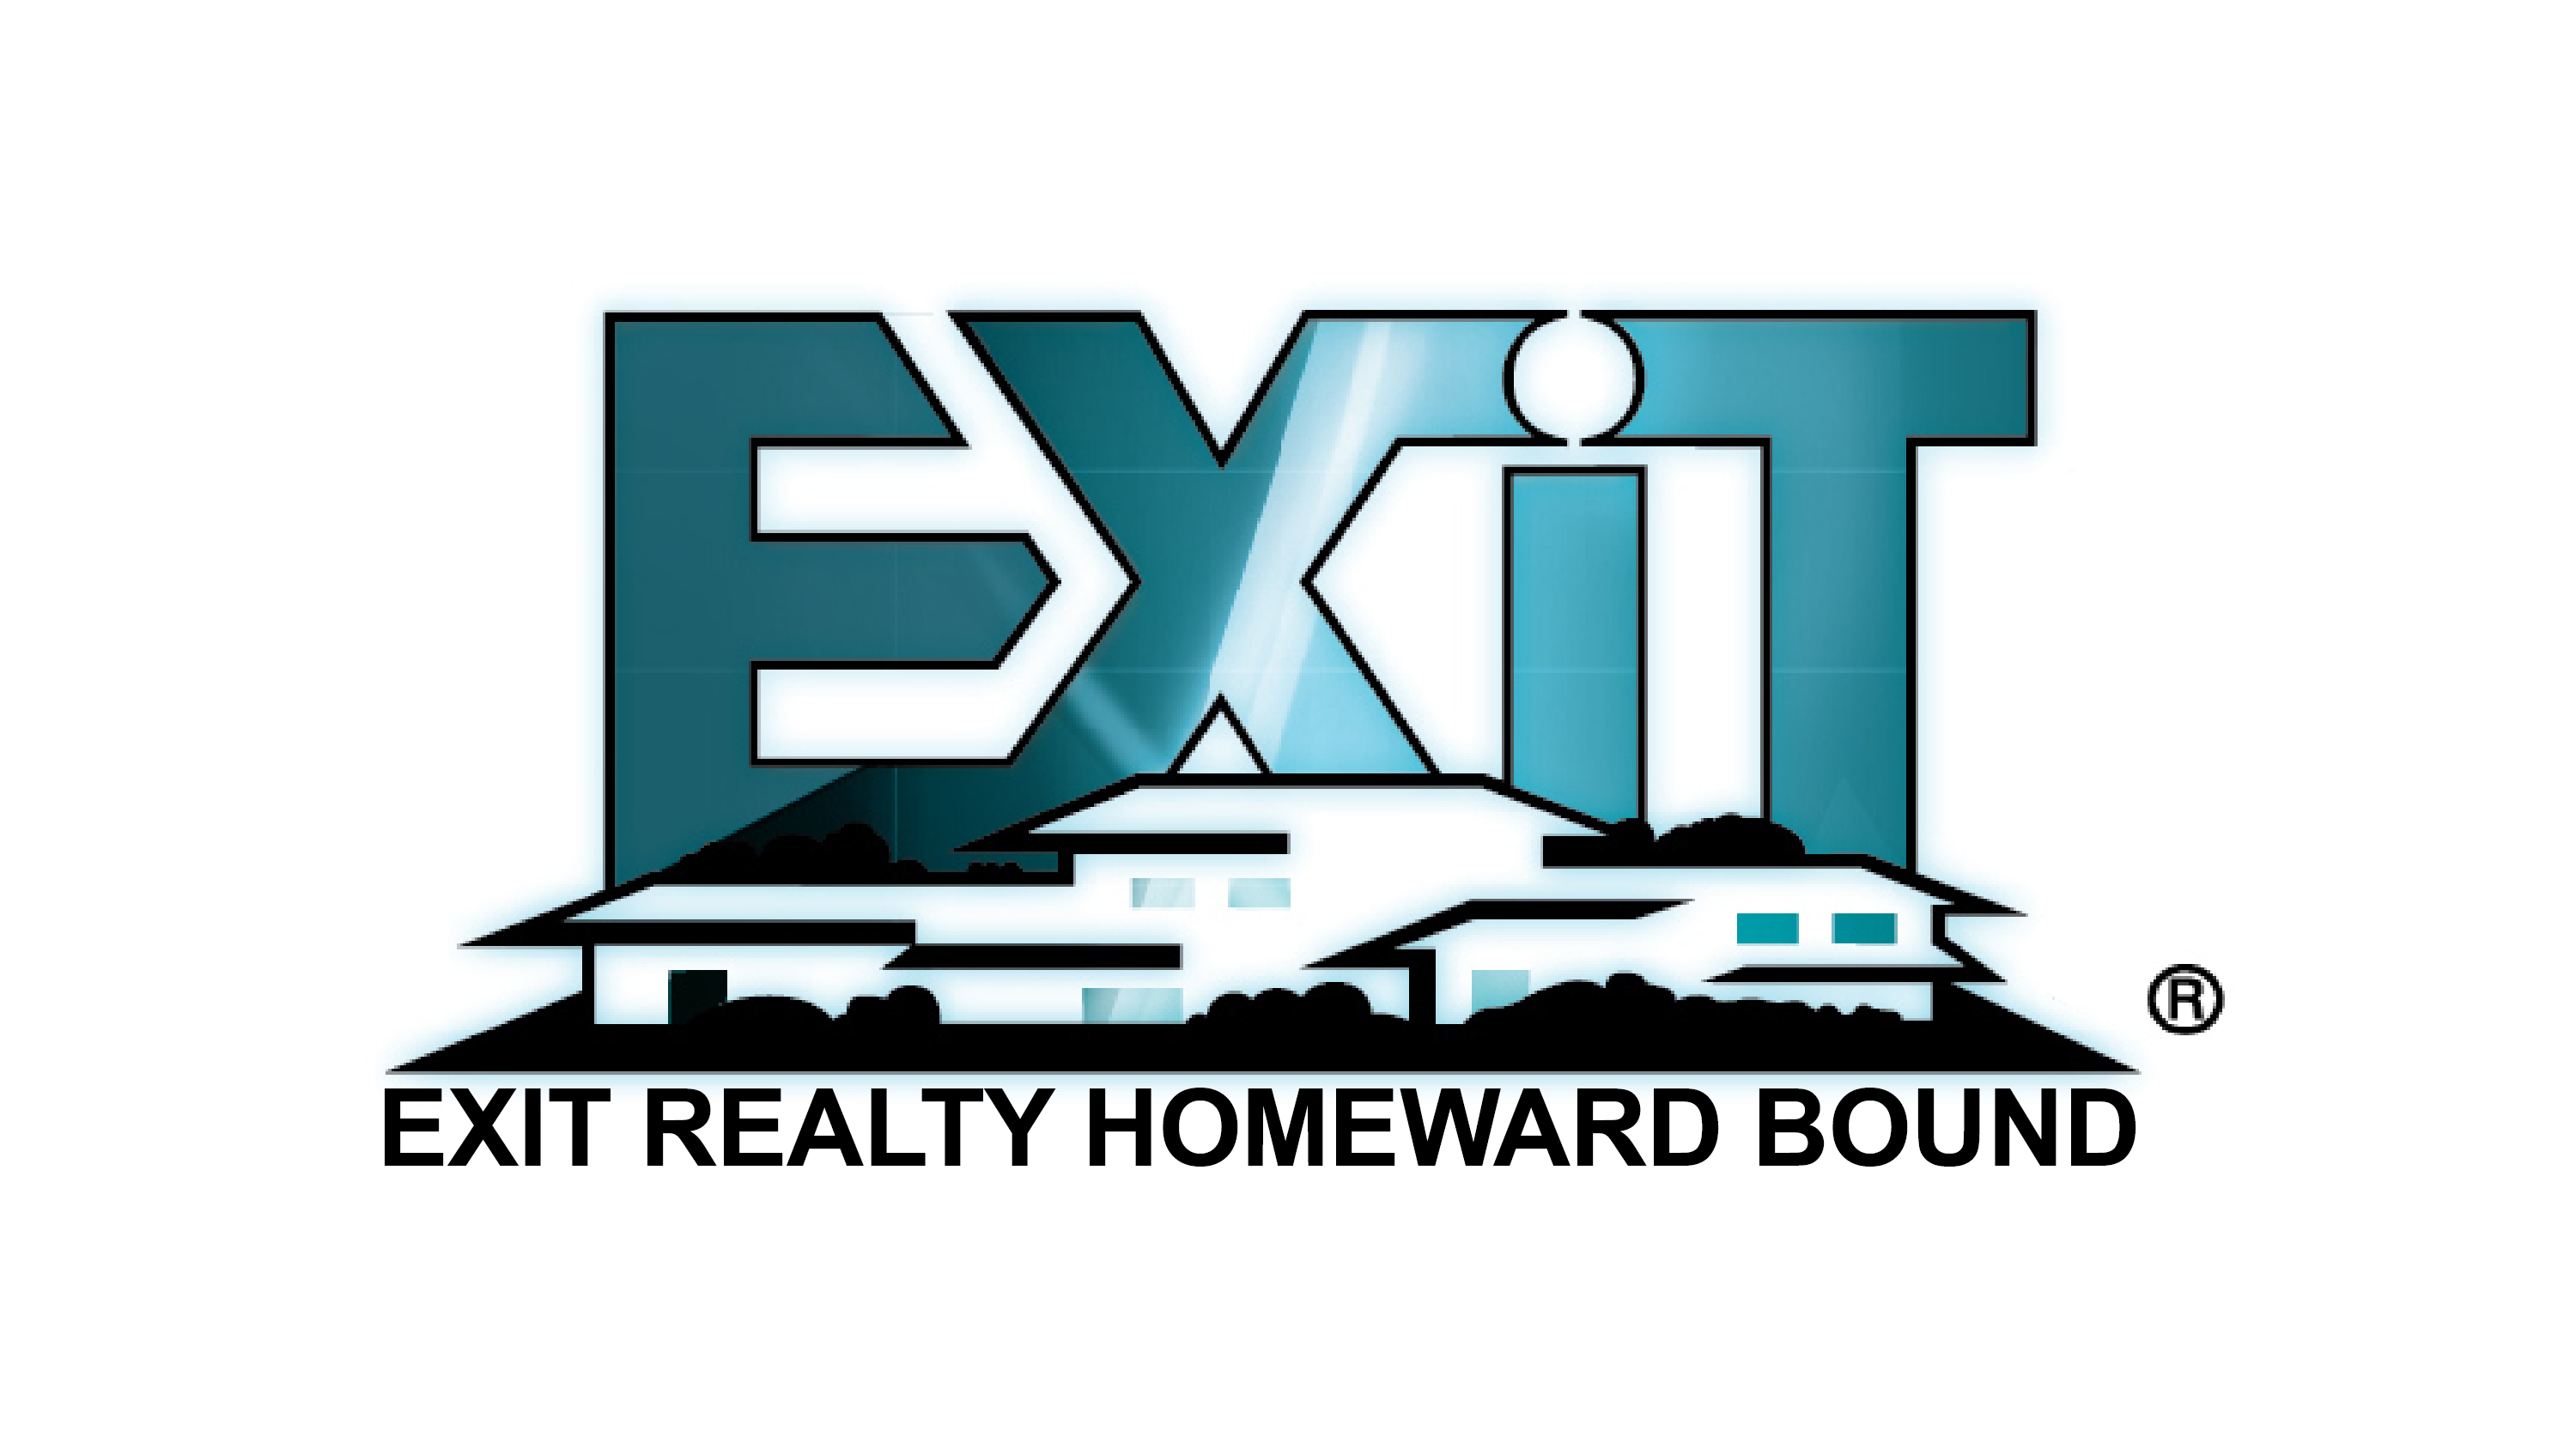 EXIT Realty Homeward Bound Expands to Oneonta, NY.